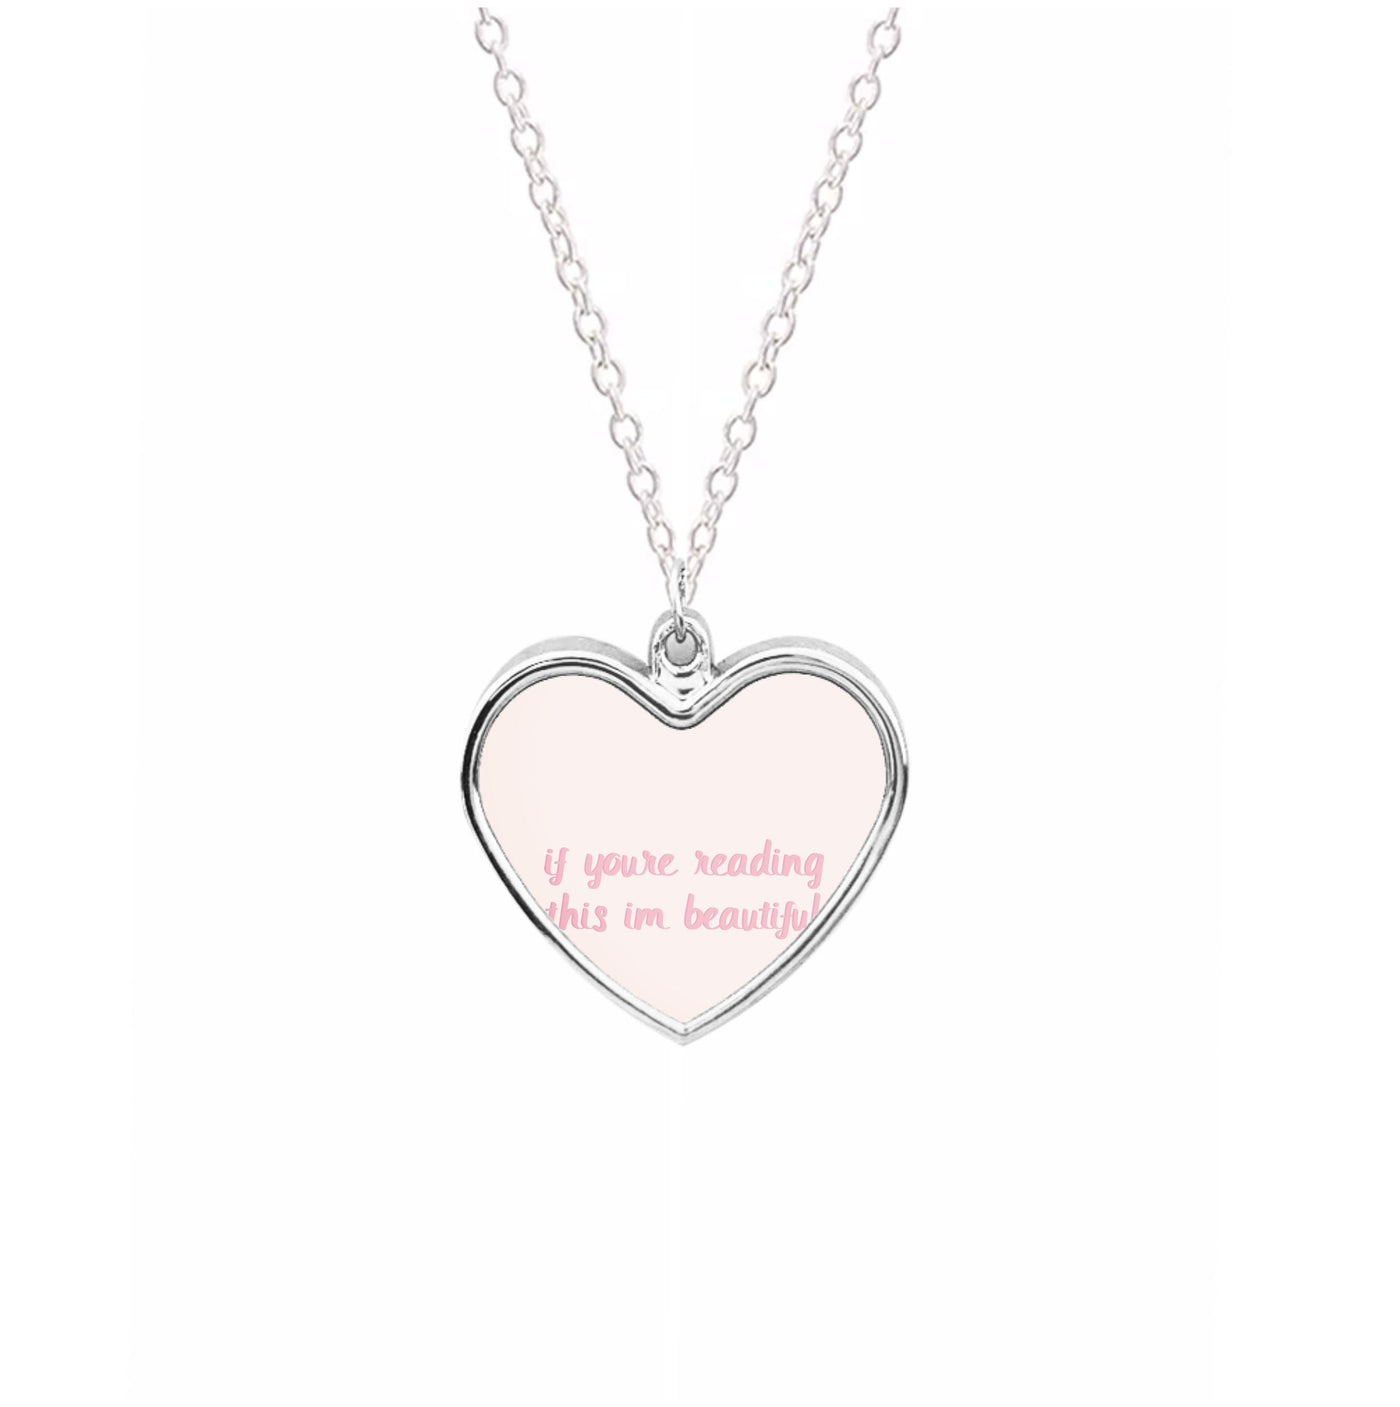 If You're Reading This Im Beautiful - Funny Quotes Necklace